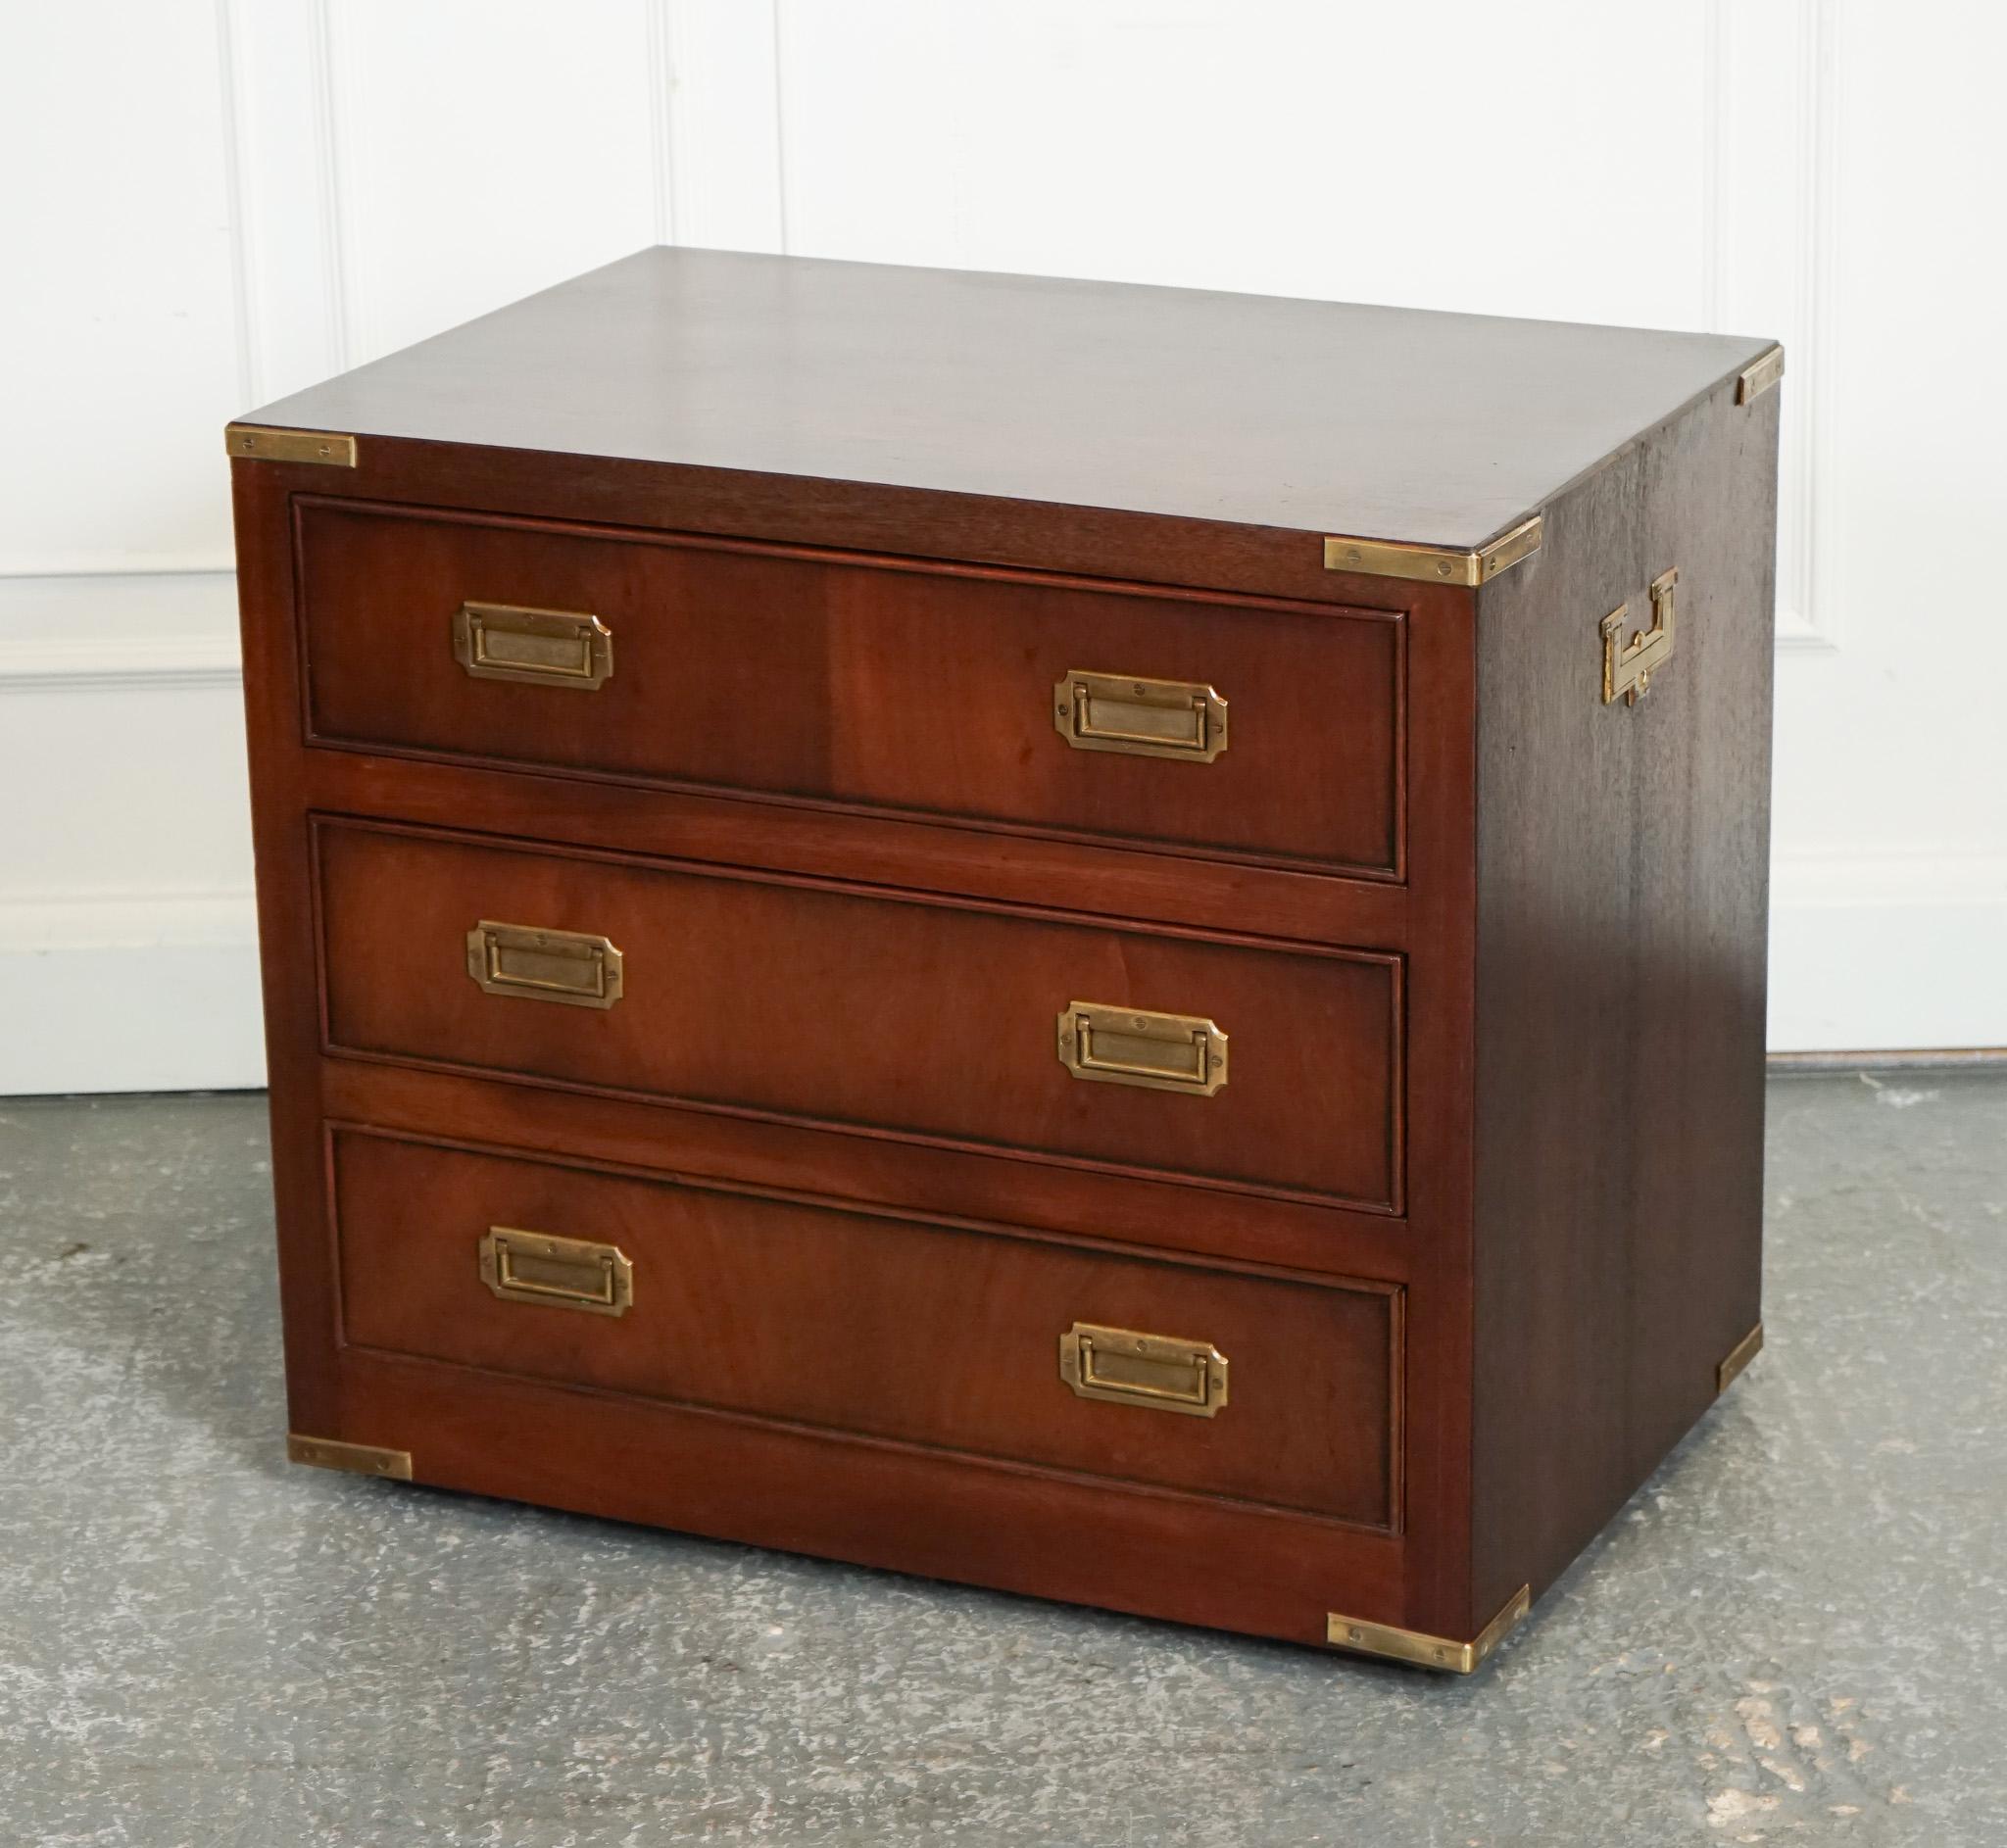 
Antiques of London



We are delighted to offer for sale this Stunning Ralph Lauren Military Campaign Chest of Drawers.

A stunning Ralph Lauren military campaign chest of drawers nightstand is a unique and captivating piece of furniture that